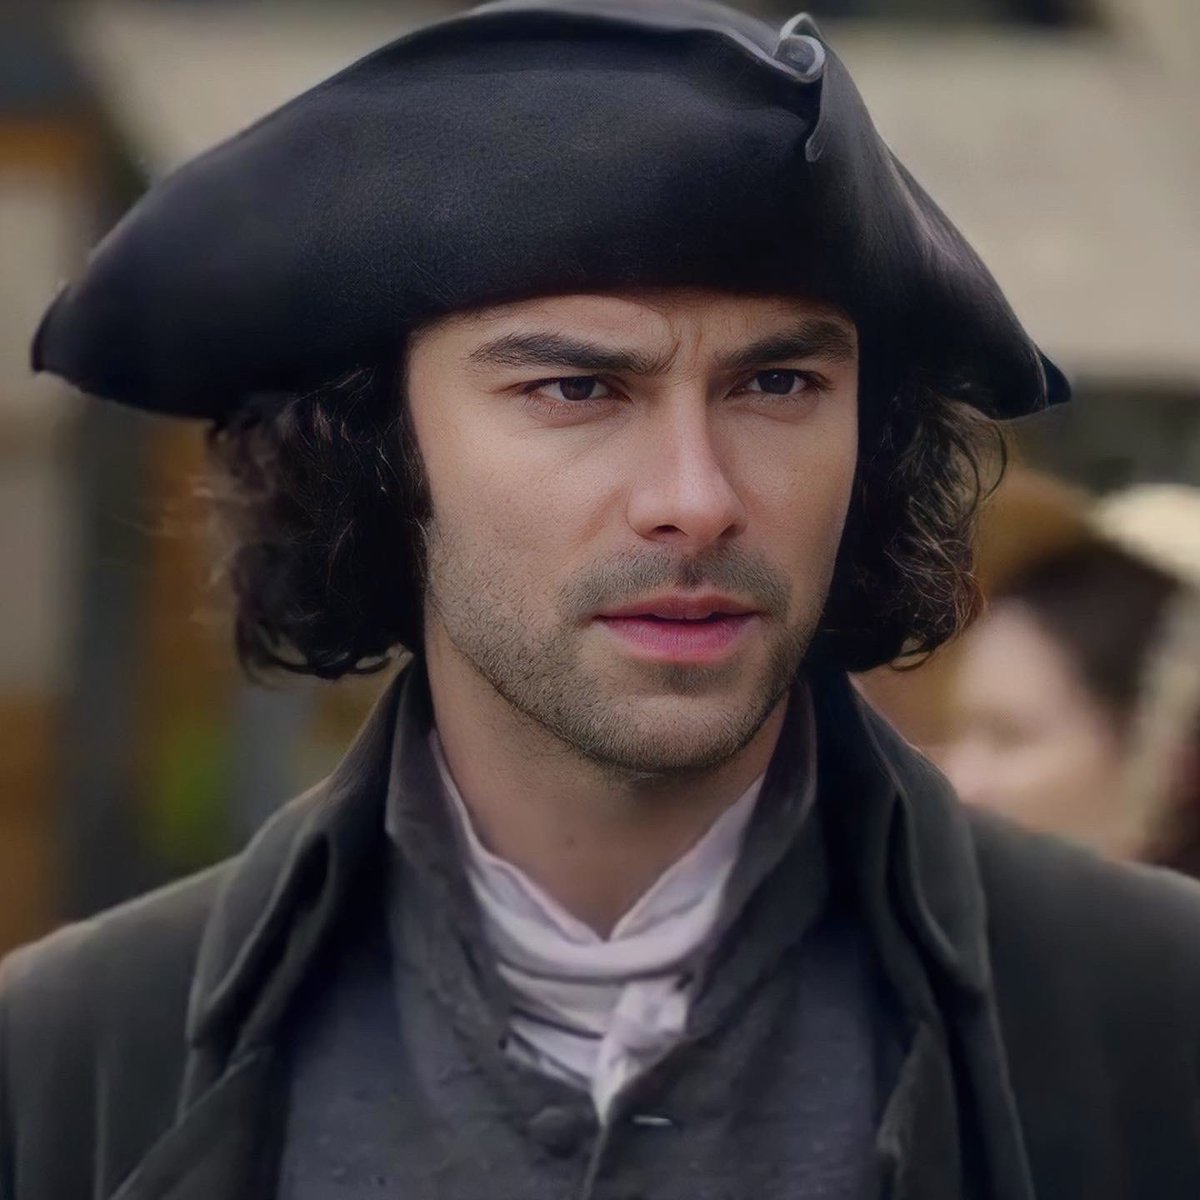 #Poldark #TricornTuesday Ross looking concerned as he sees JC with #George..hope you’re having a good day #AidanTurner #AidanCrew ❣️